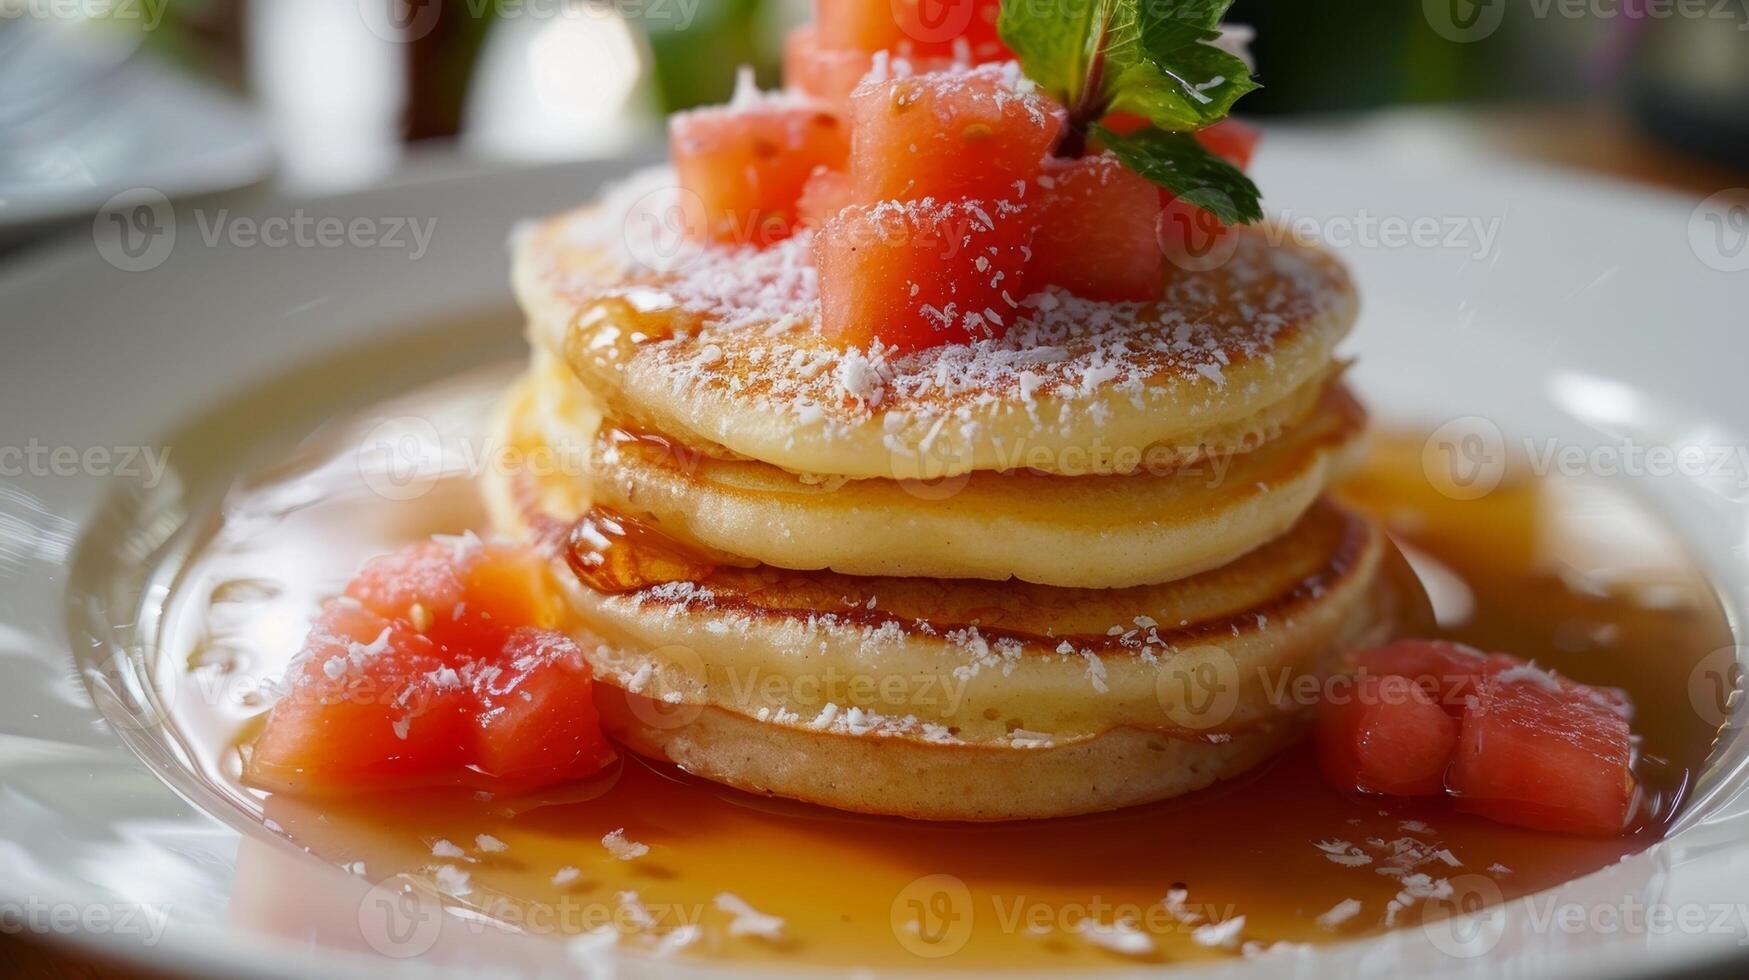 Light and fluffy these coconut pancakes with a side of guava syrup are a tribute to the tropical breakfast recipes of the early 20th century photo